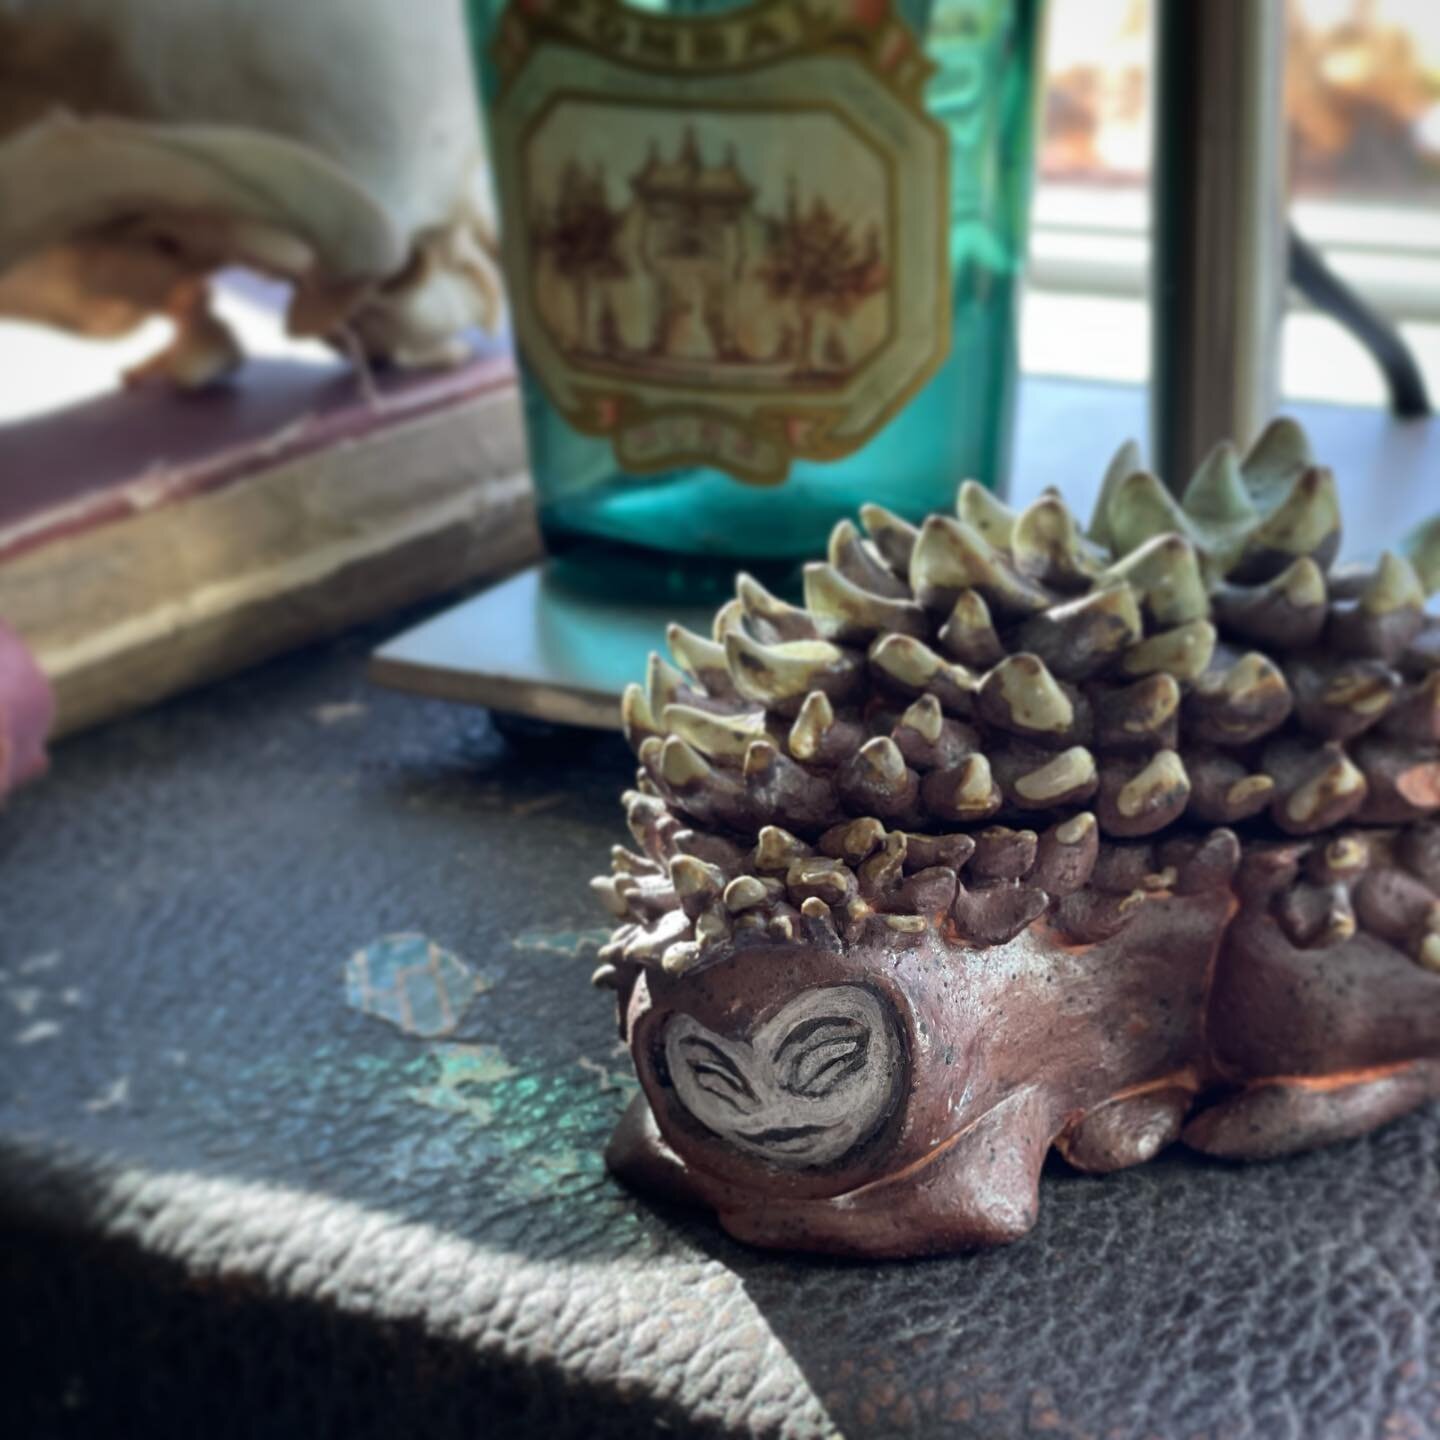 &ldquo;Learn from yesterday, live for today, look to tomorrow, rest this afternoon.&rdquo; -Charles M.Schultz  #naptime #tinysculpture #ceramicart #handbuilding #saltfired #surrealism #succulents #charlesmschulz #madeindenver #organicforms